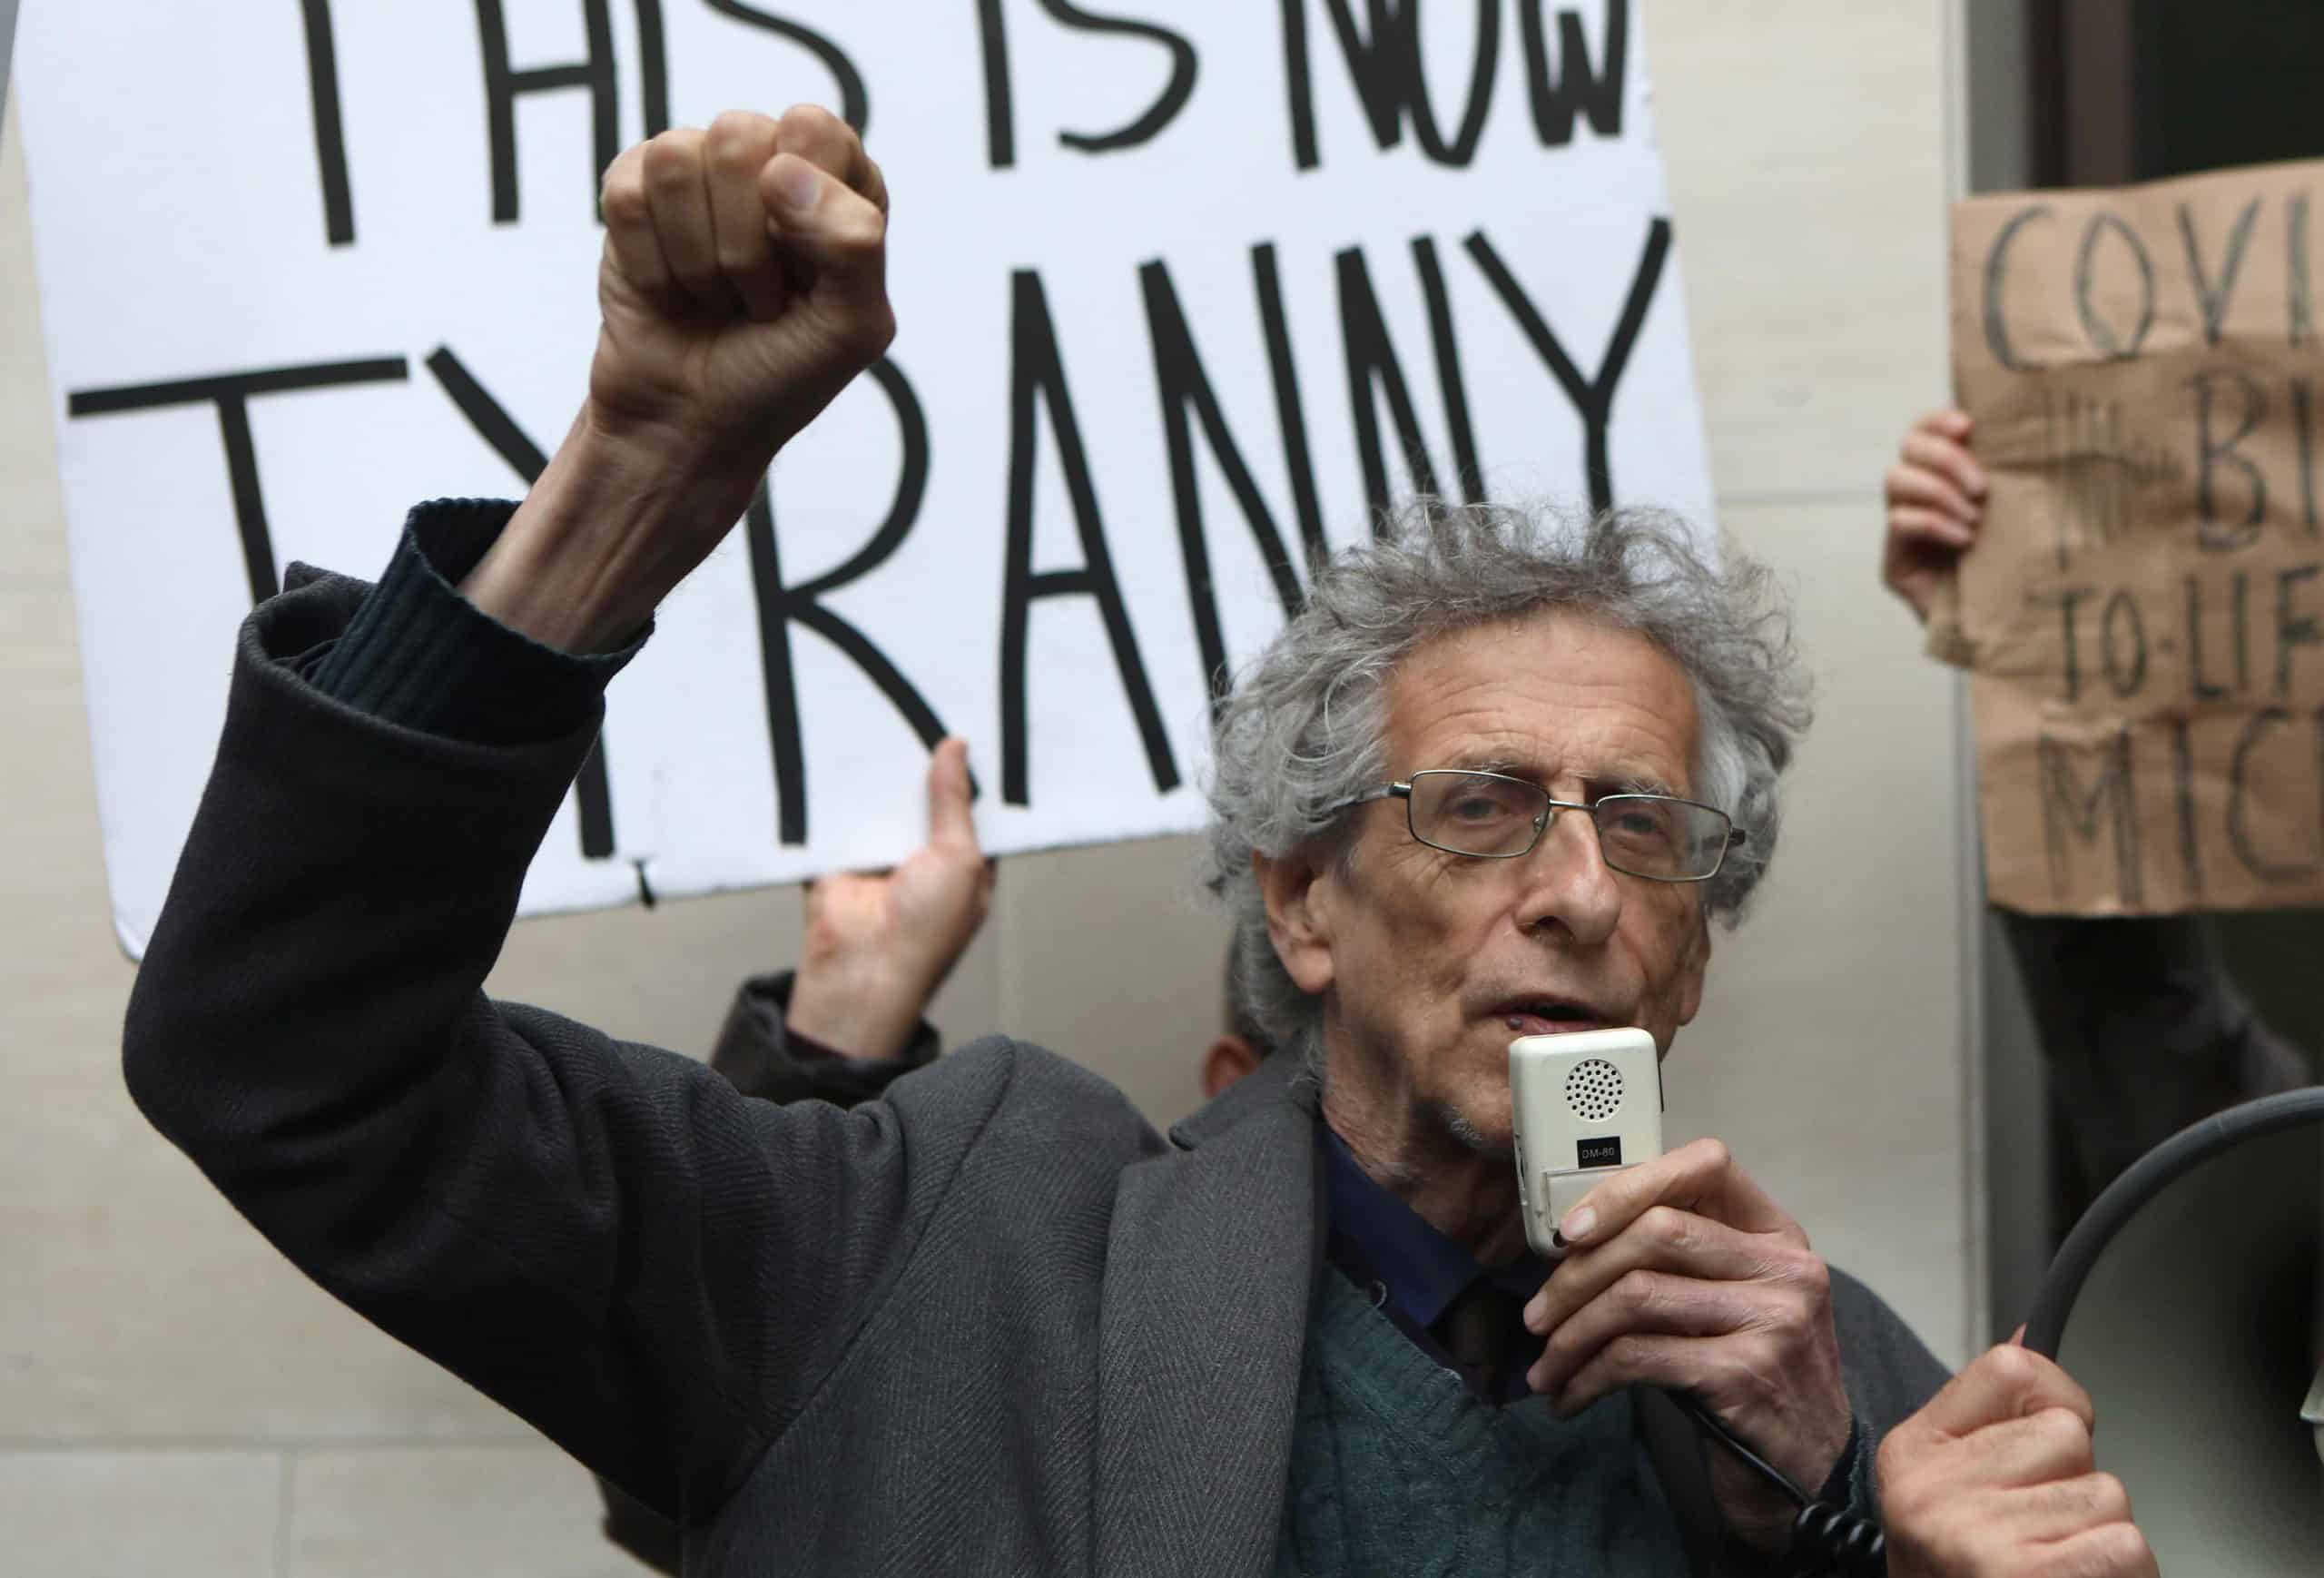 Piers Corbyn tricked into taking £10,000 bung to stop criticising AZ vaccine